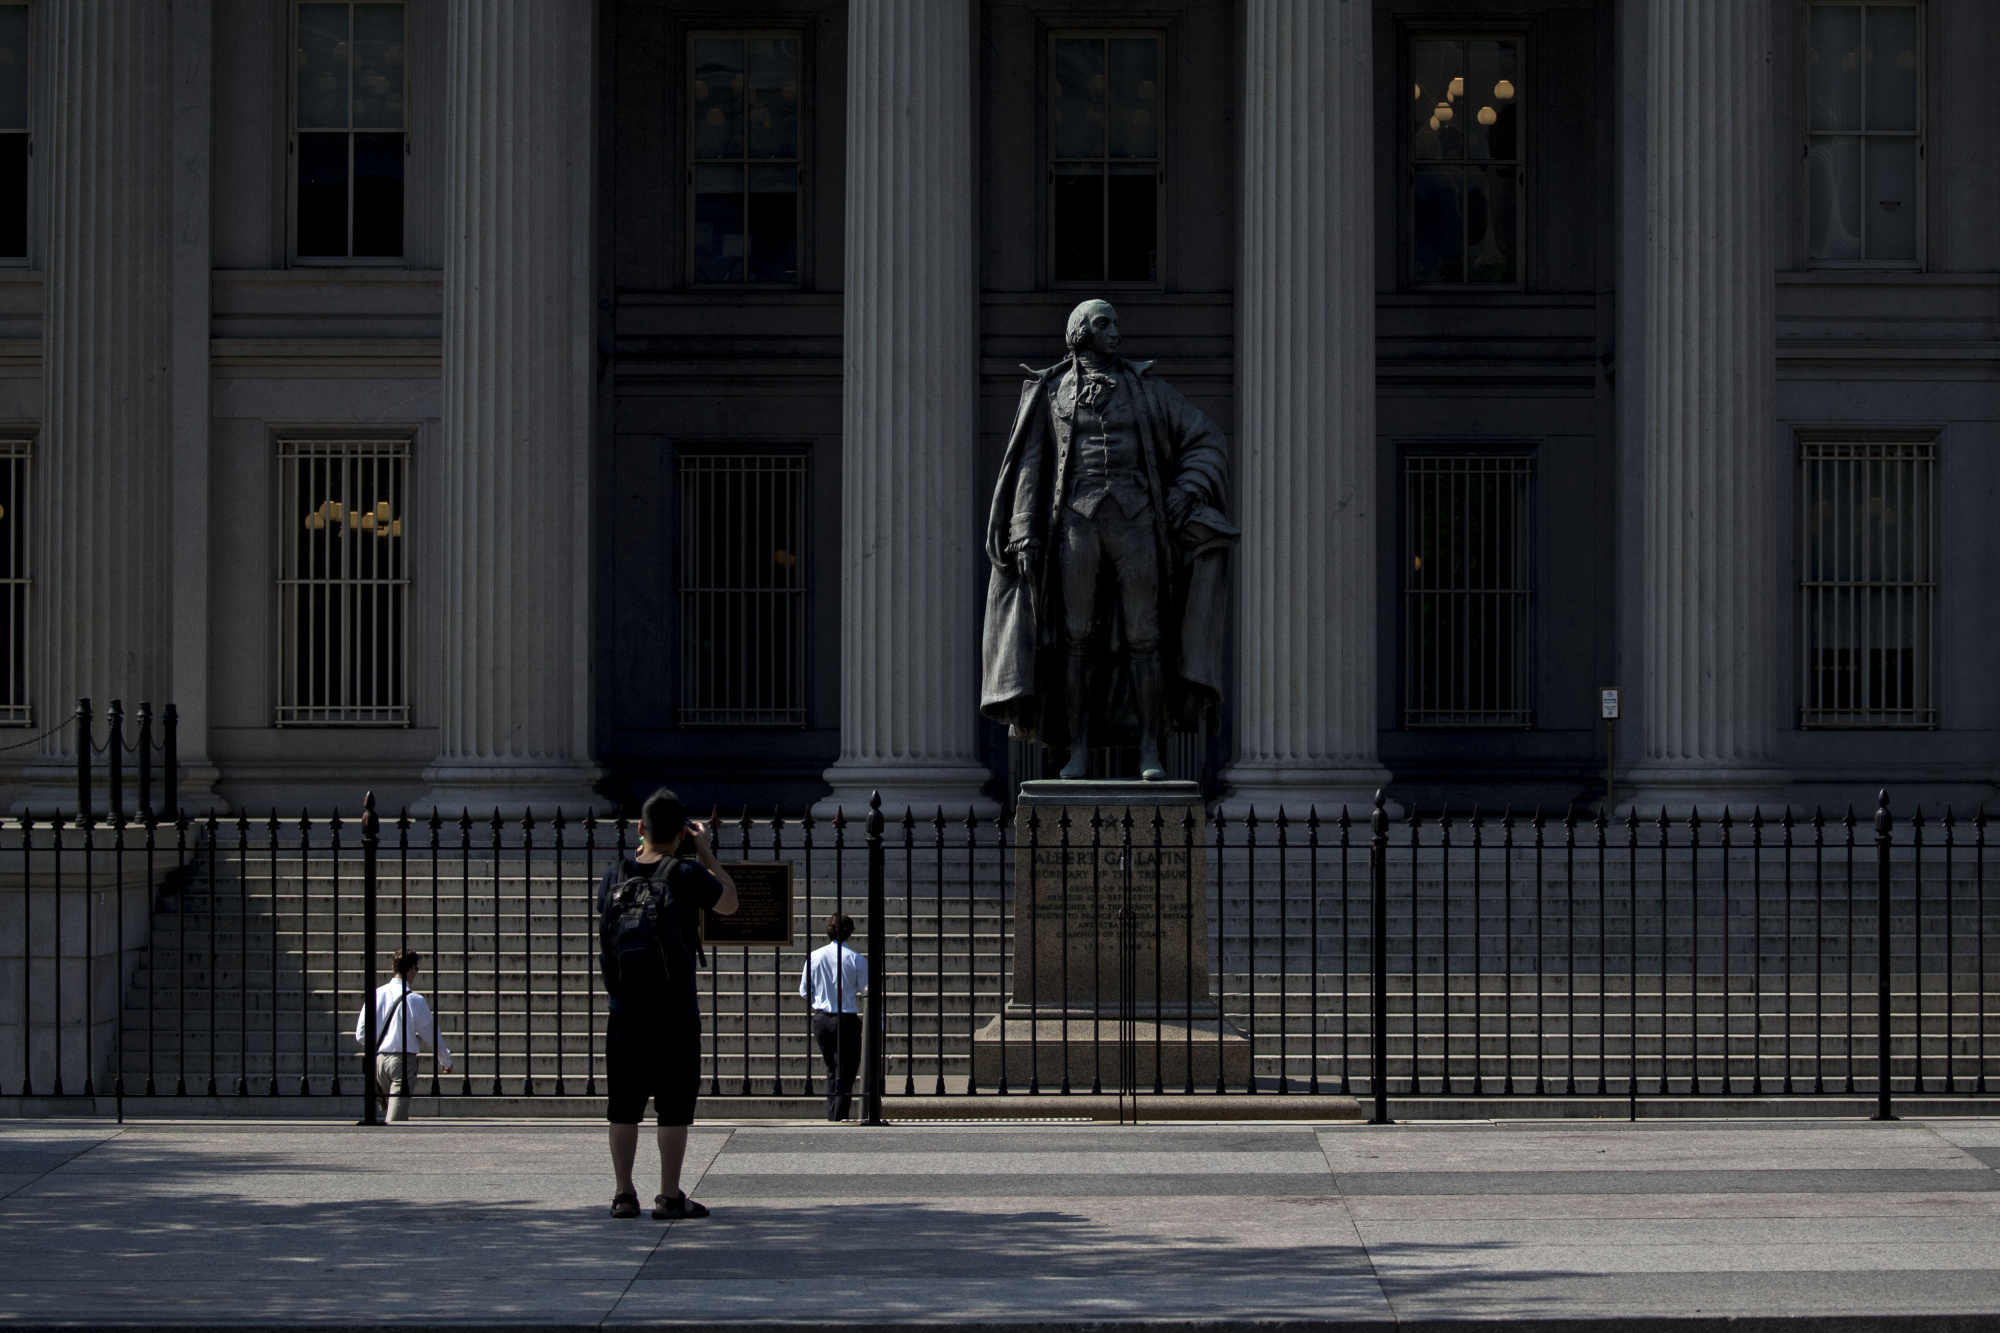 A visitor takes a photograph outside the U.S. Treasury building in Washington, D.C.